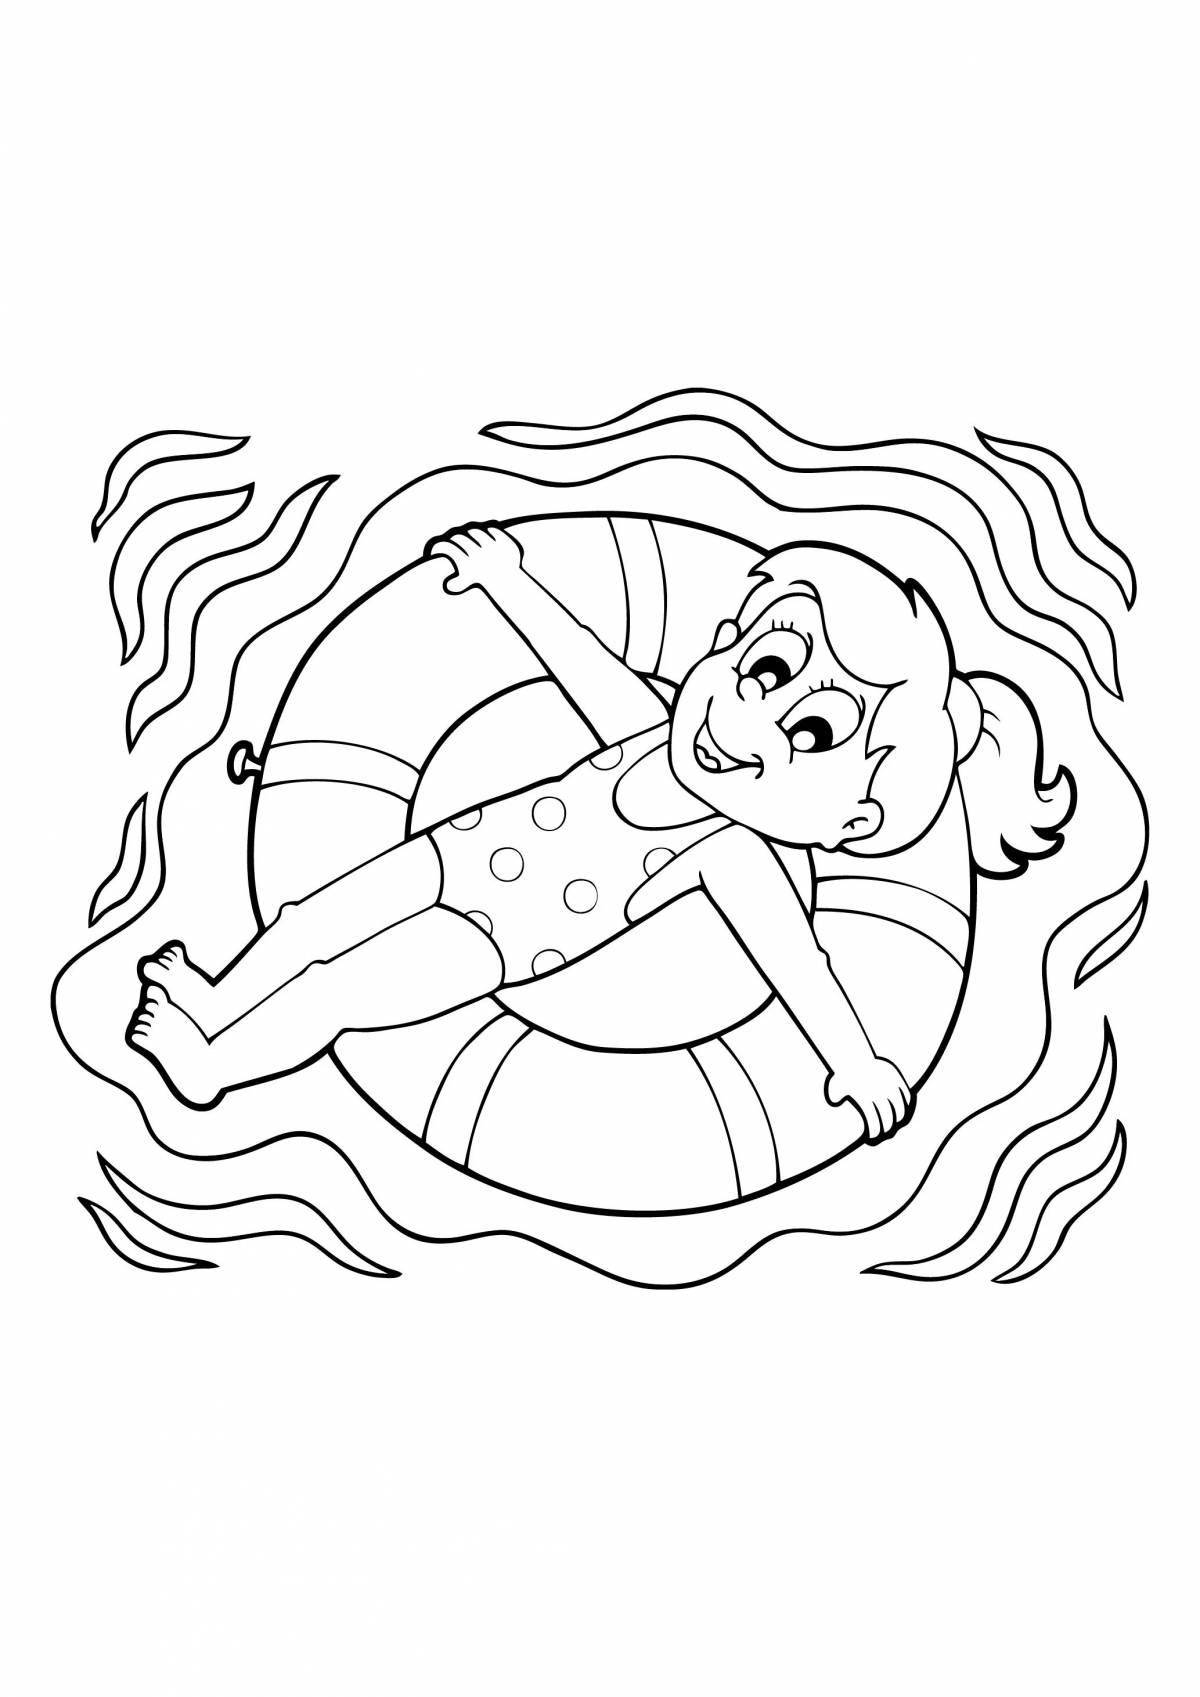 Bright water safety coloring page